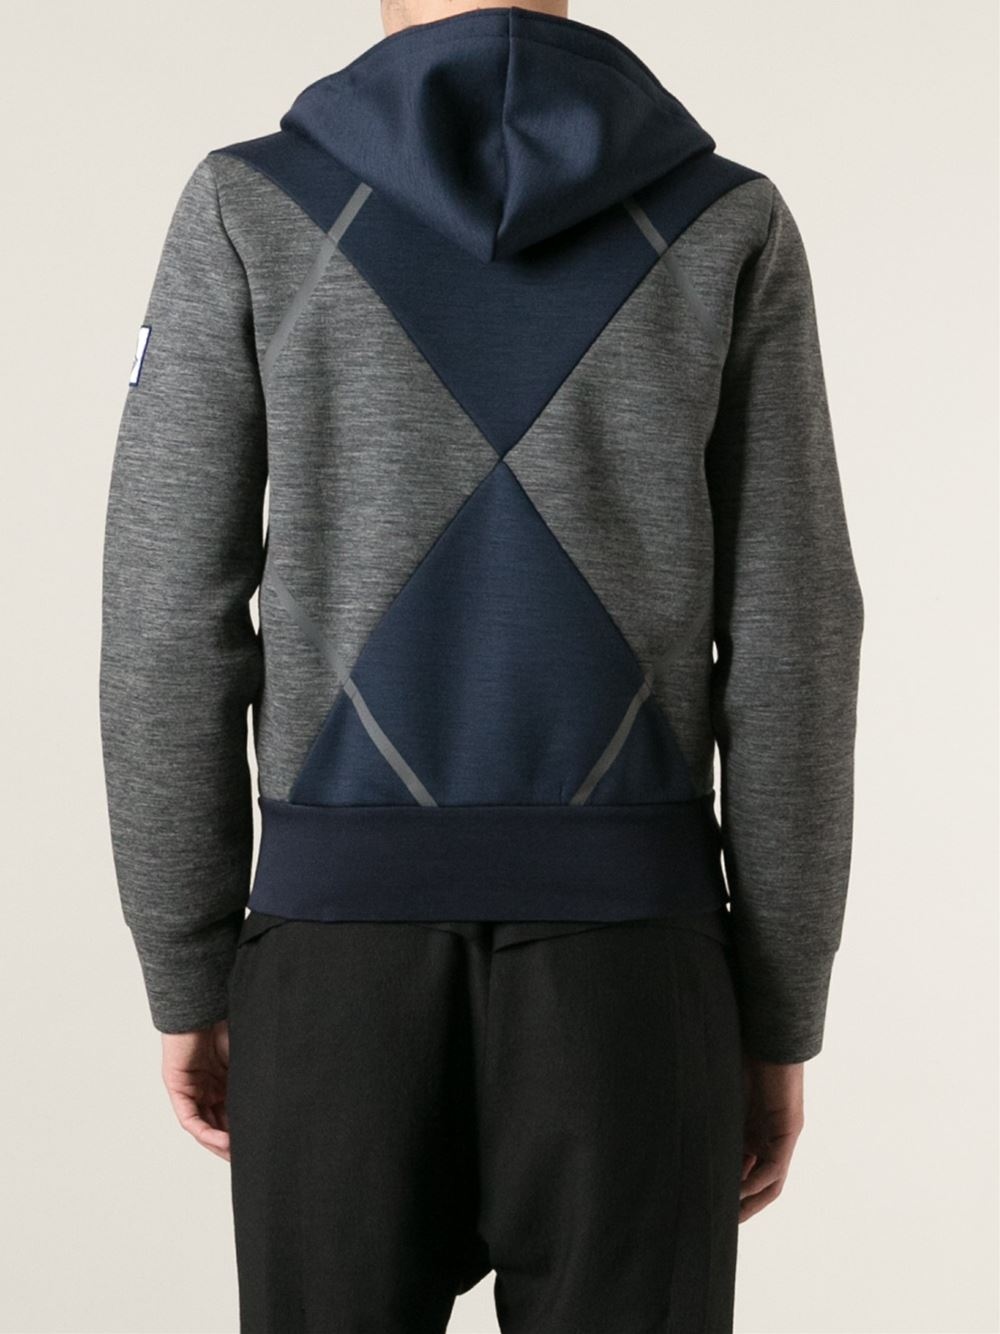 Moncler Gamme Bleu Contrasting Panels Hoodie in Grey (Gray) for Men - Lyst